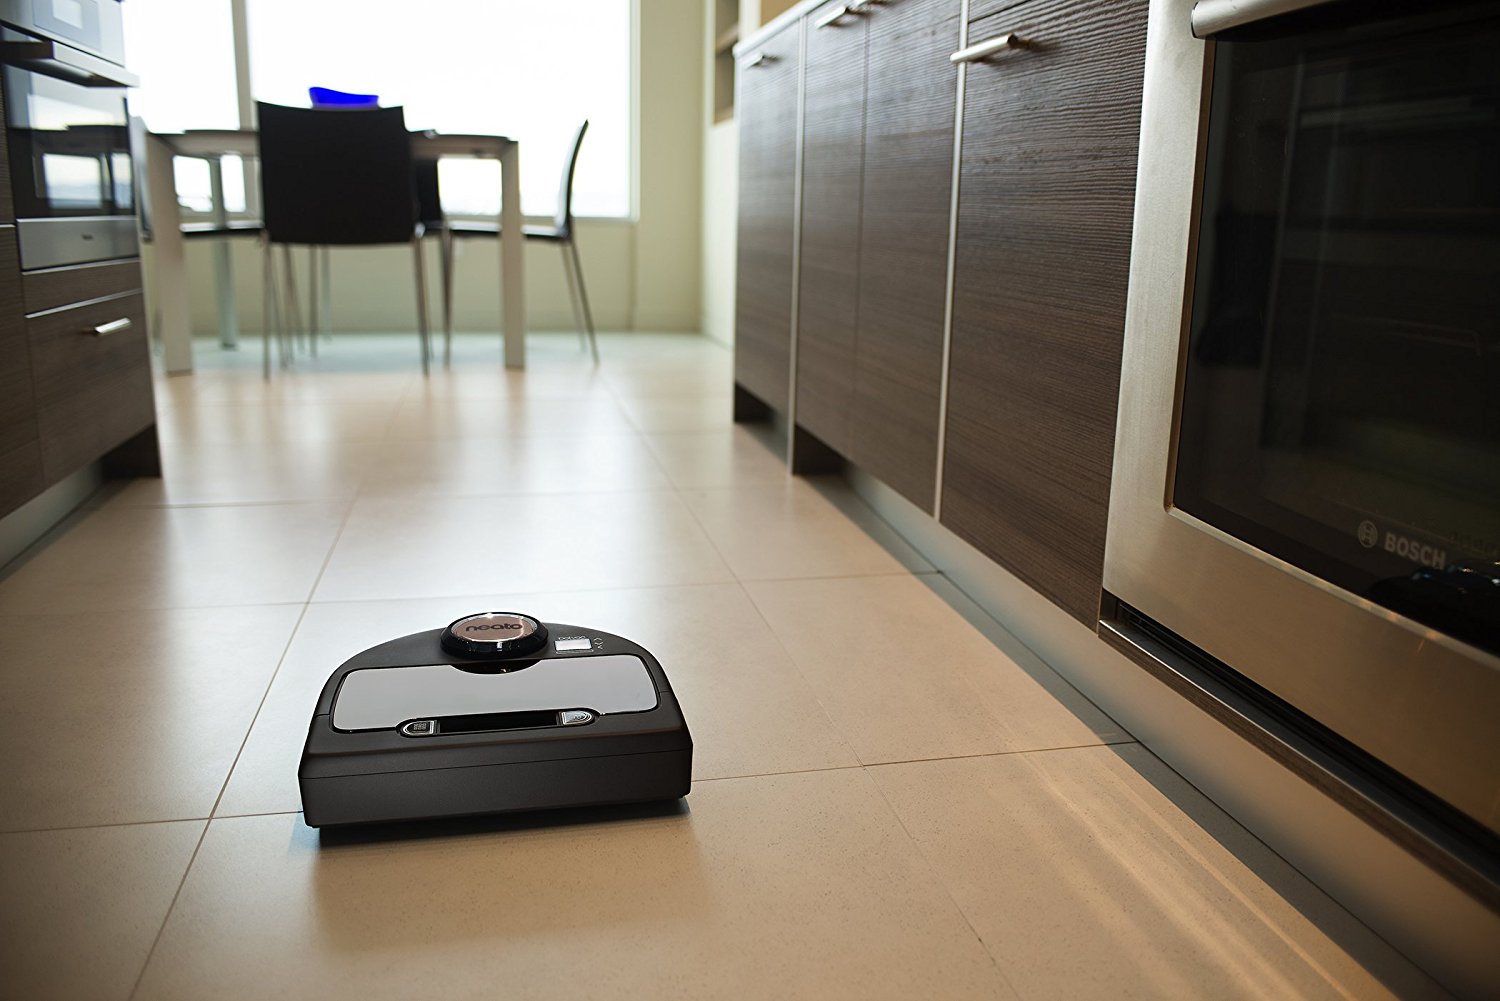 Neato-Botvac-Connected-Wi-Fi-Enabled-Robot-cleaner